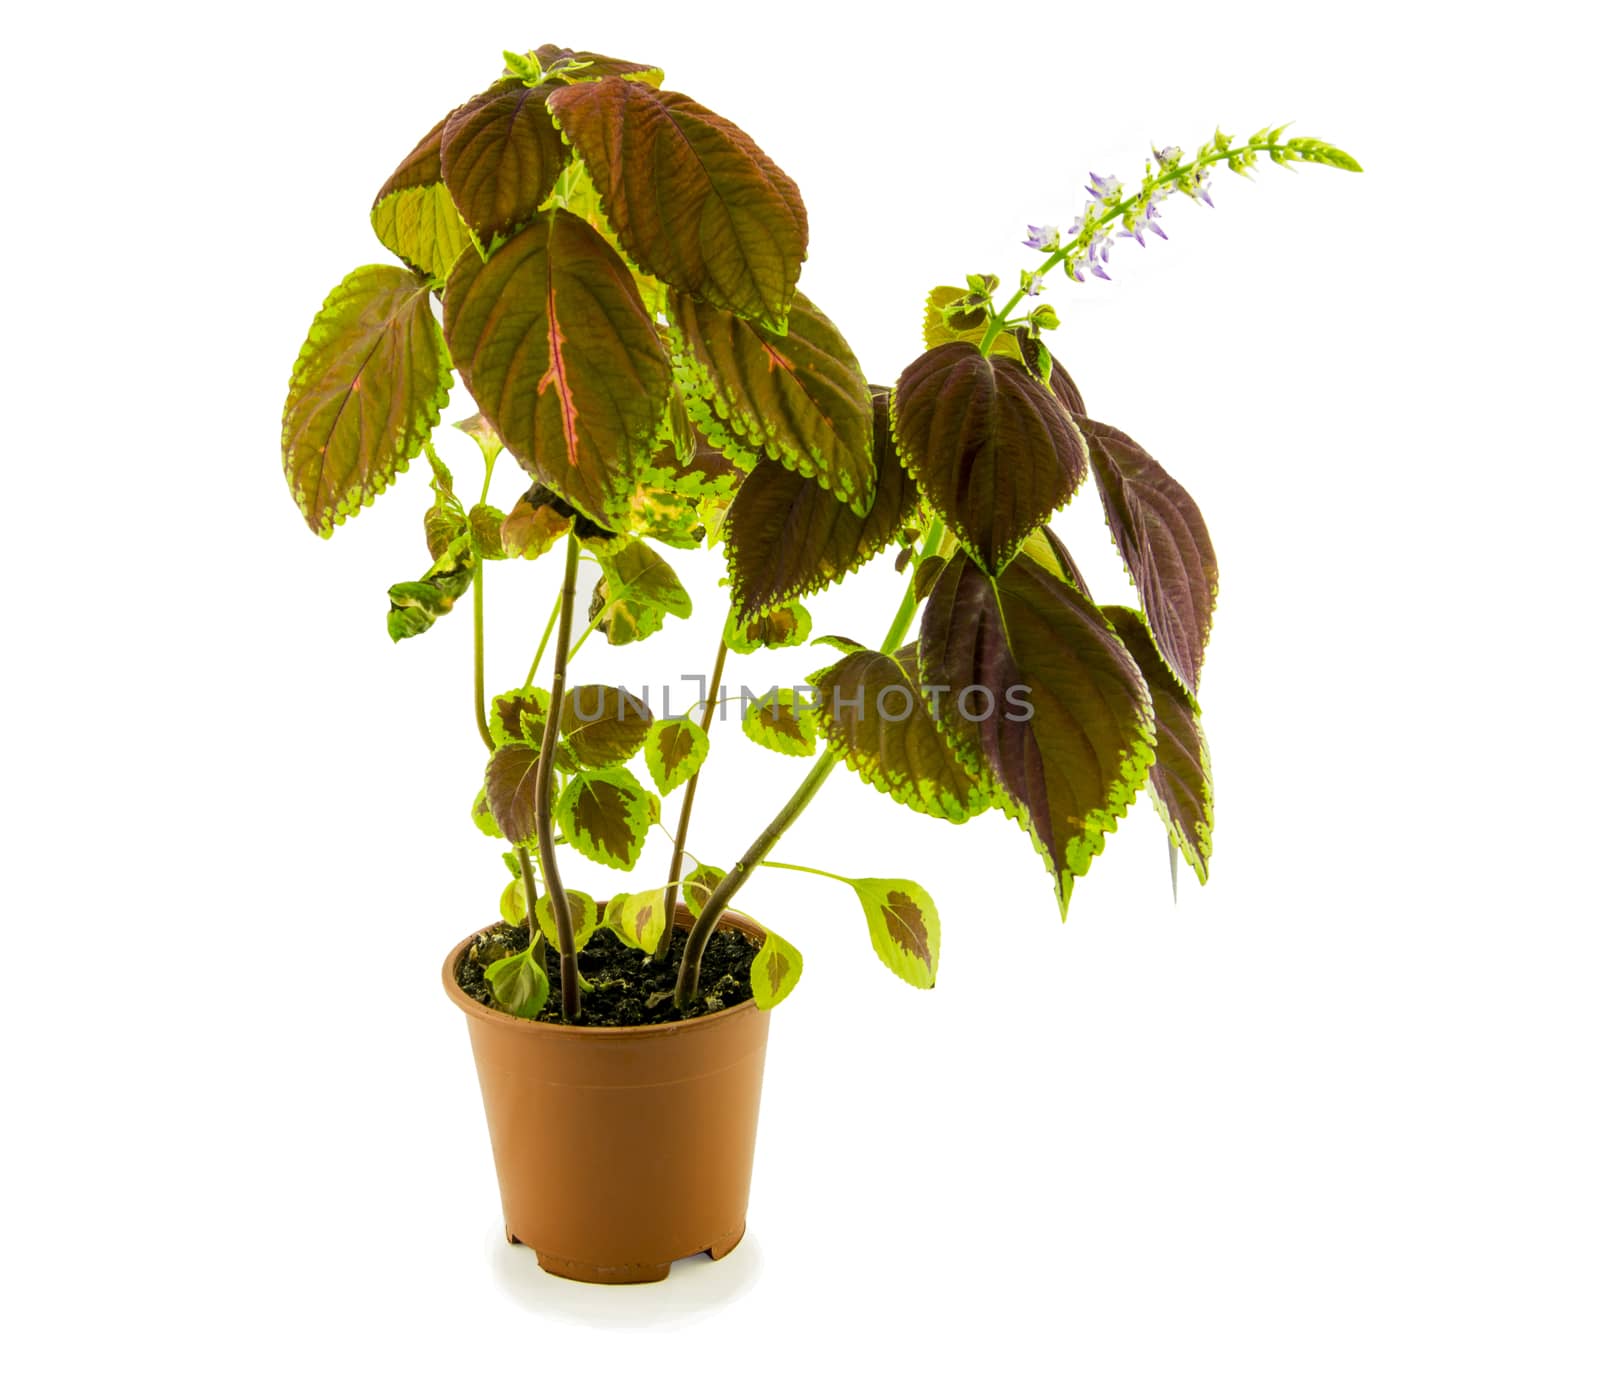 Coleus flowers isolated on white background. For your commercial and editorial use.